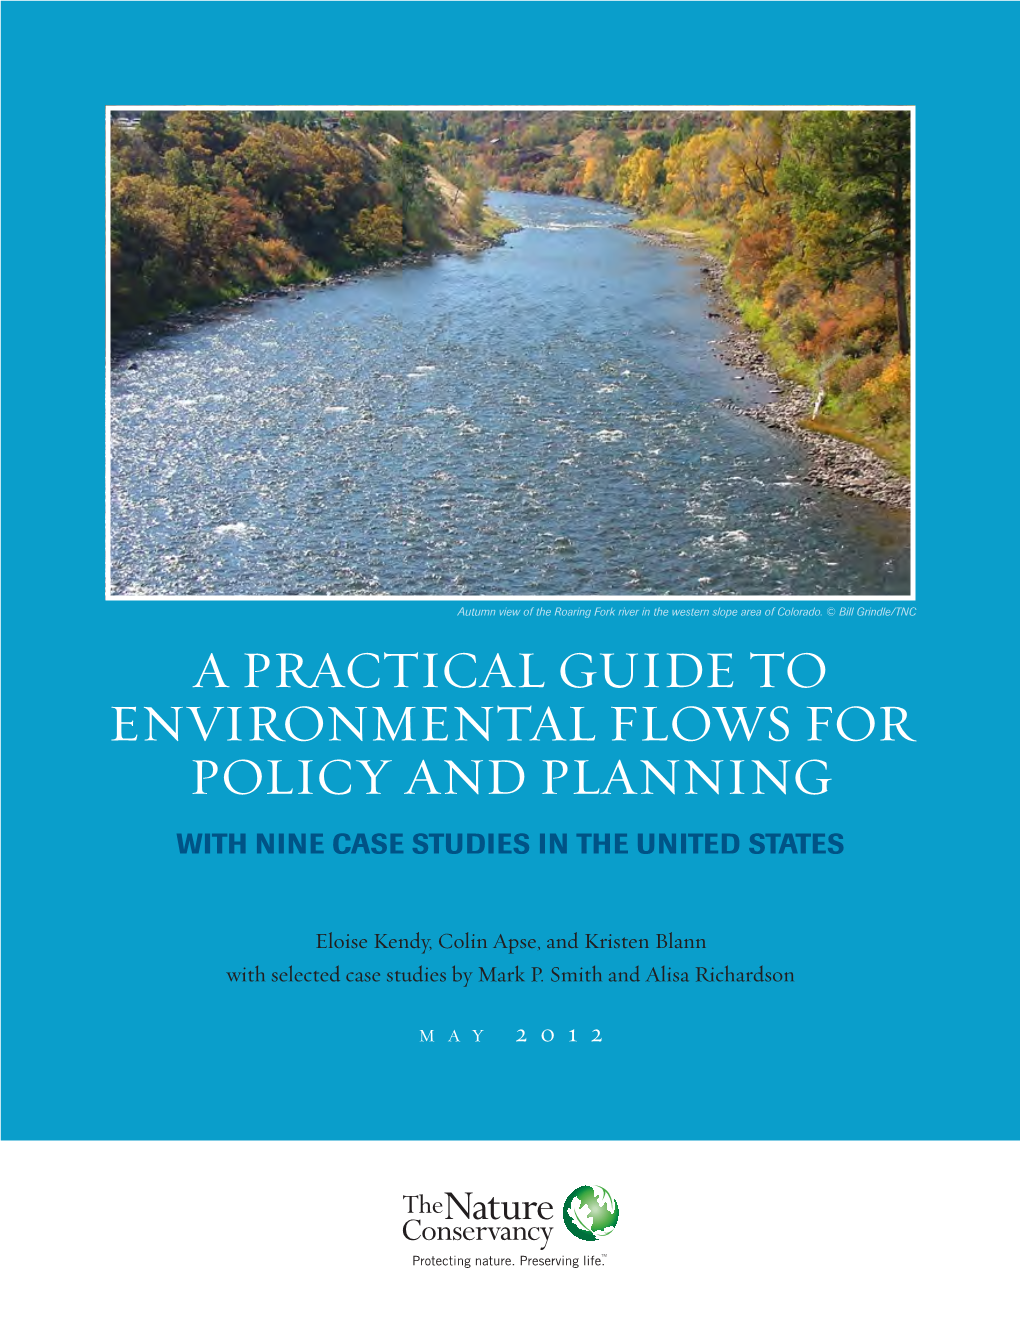 A Practical Guide to the Policy of Environmental Flows